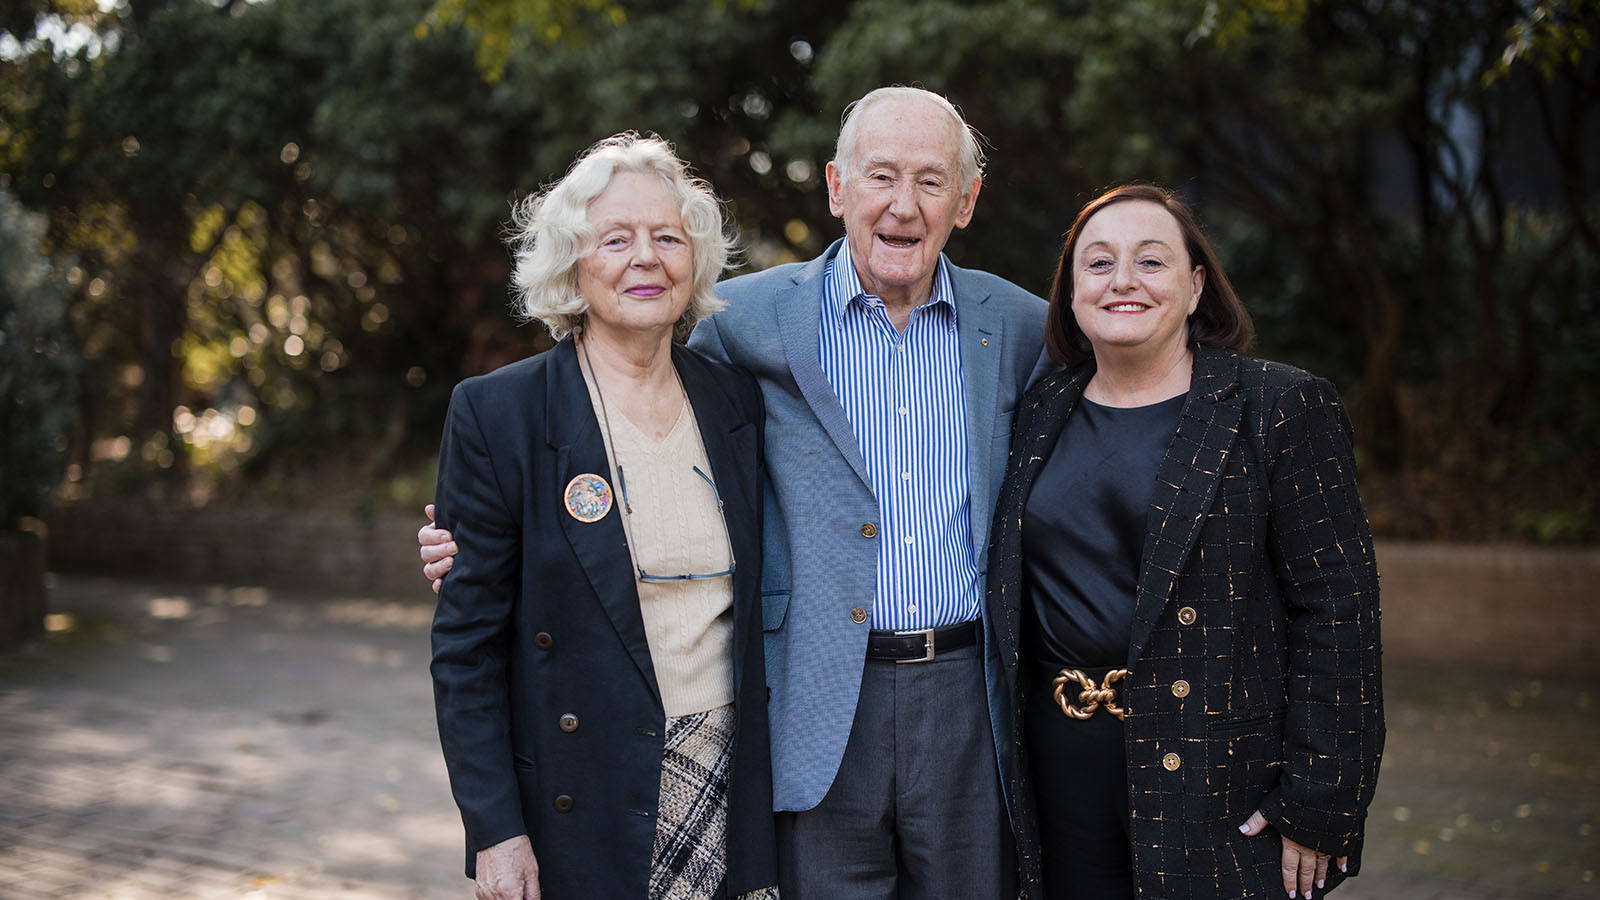 UOW alumna Suzanne Walker, former UOW Vice-Chancellor Professor McKinnon, and current UOW Vice-Chancellor Professor Patricia Davidson